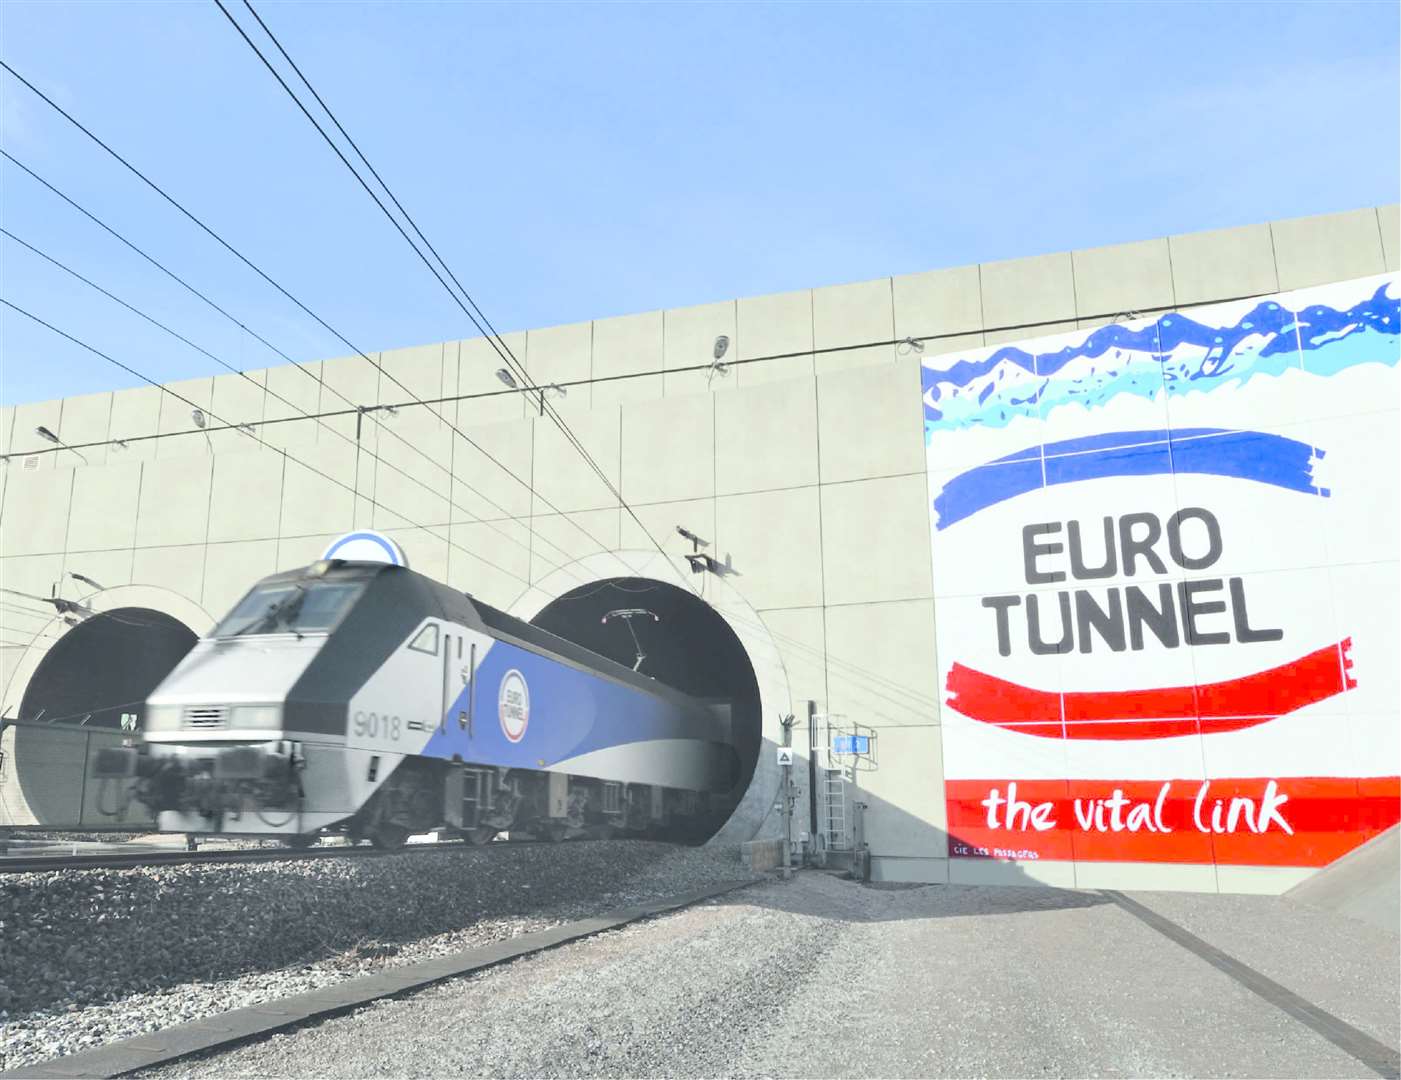 Eurotunnel is only offering short stay flexiplus tickets so day trippers must pay around £214